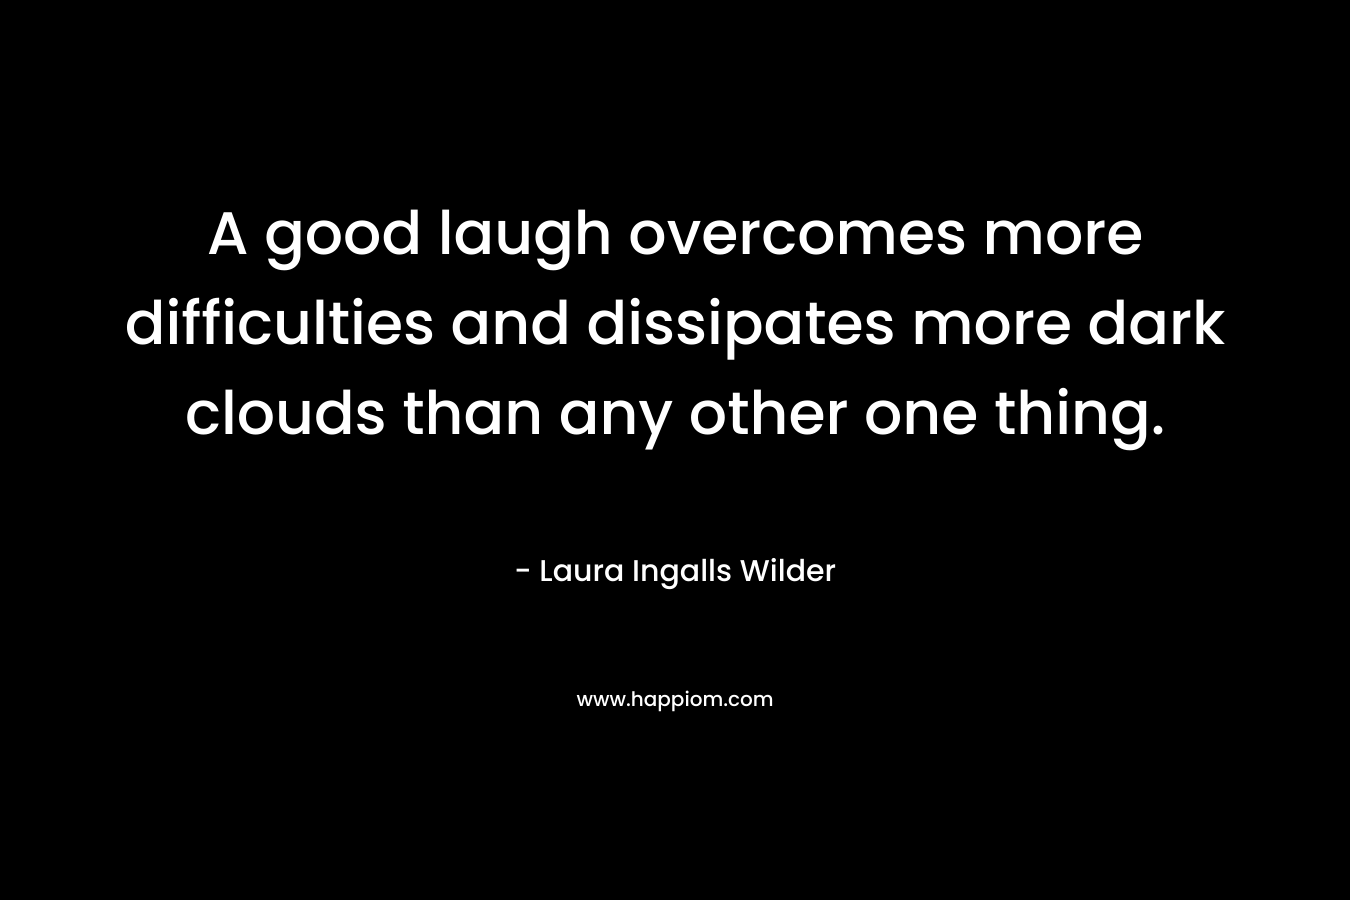 A good laugh overcomes more difficulties and dissipates more dark clouds than any other one thing. – Laura Ingalls Wilder